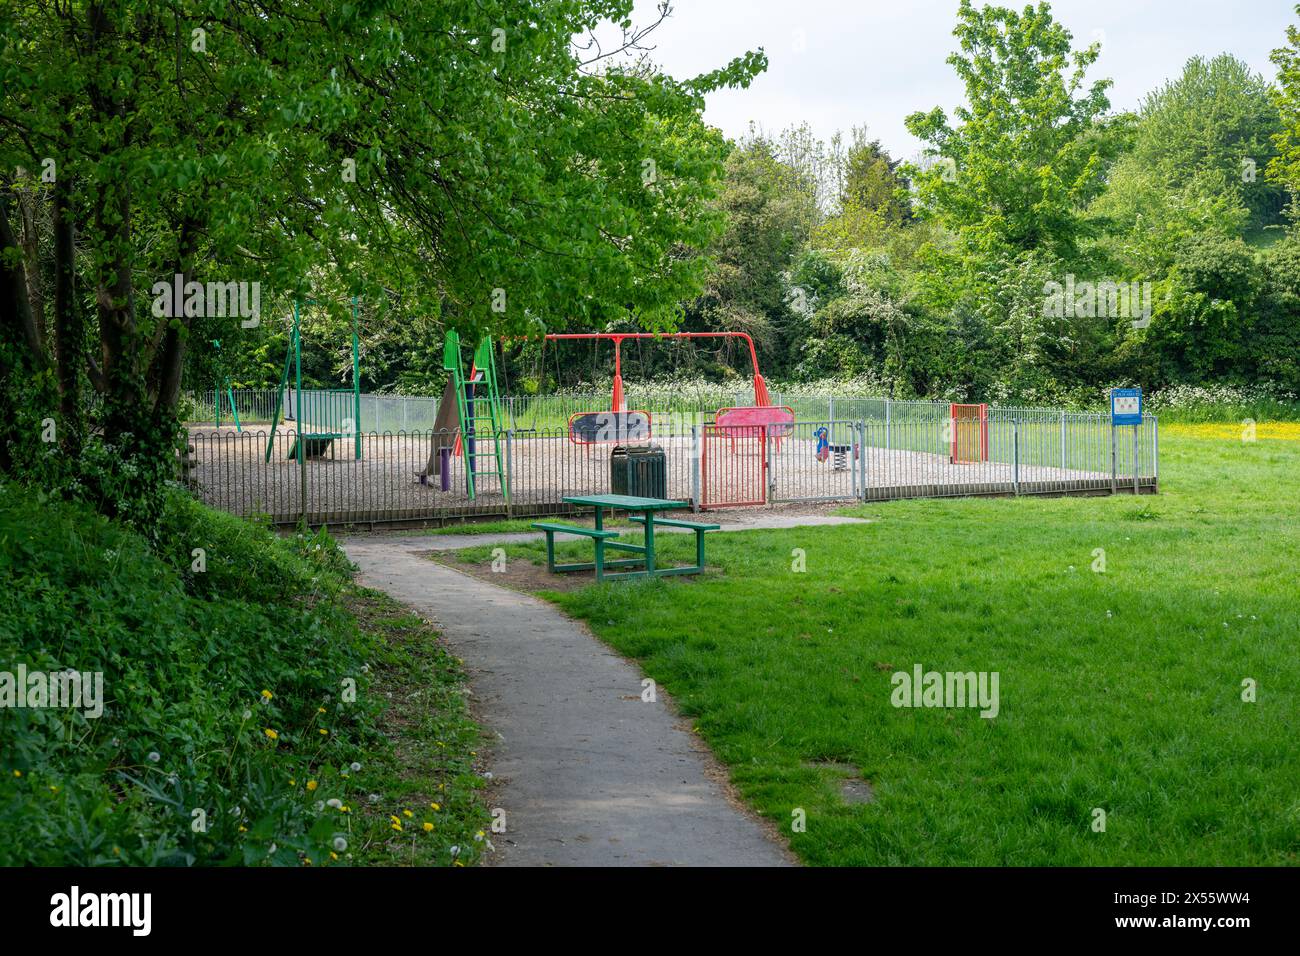 A small, colourful, empty children's playground surrounded by trees, shrubs, and spring blossom. Stock Photo